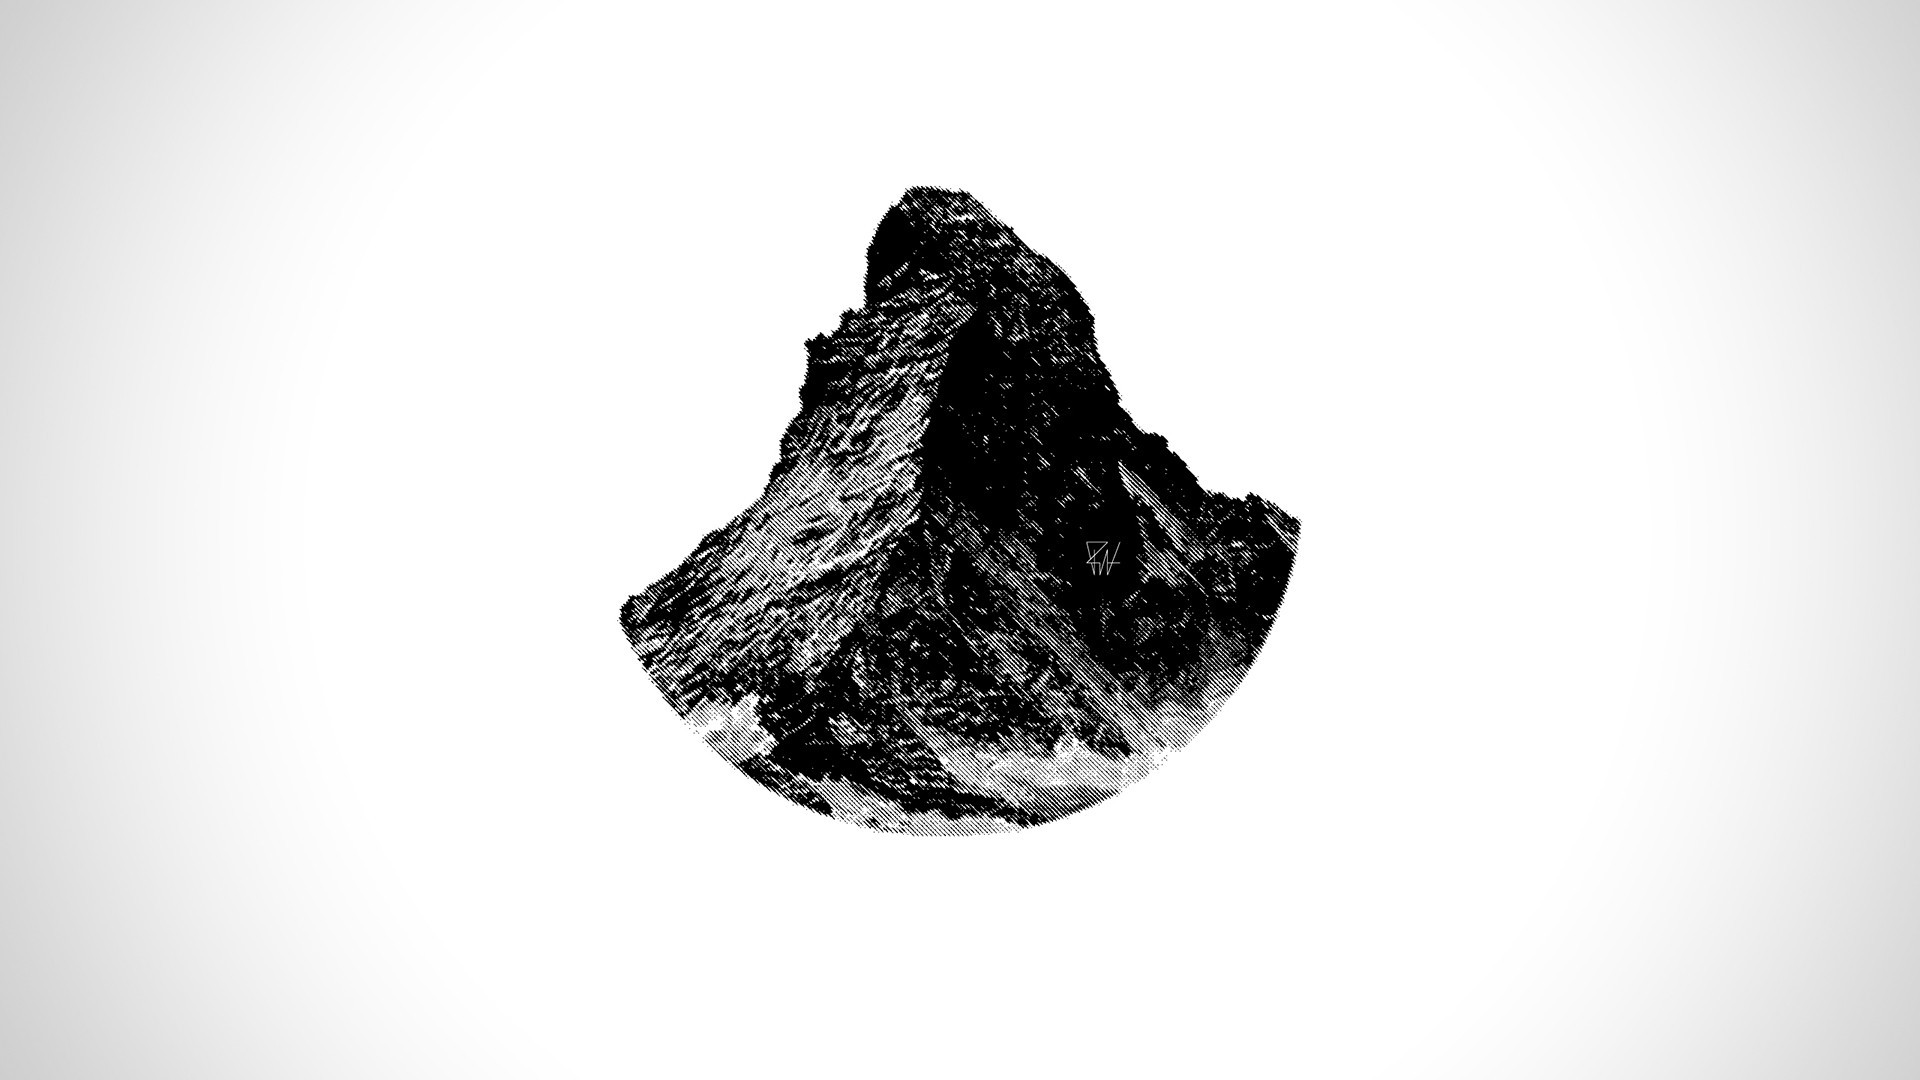 General 1920x1080 Matterhorn mountains simple background minimalism abstract